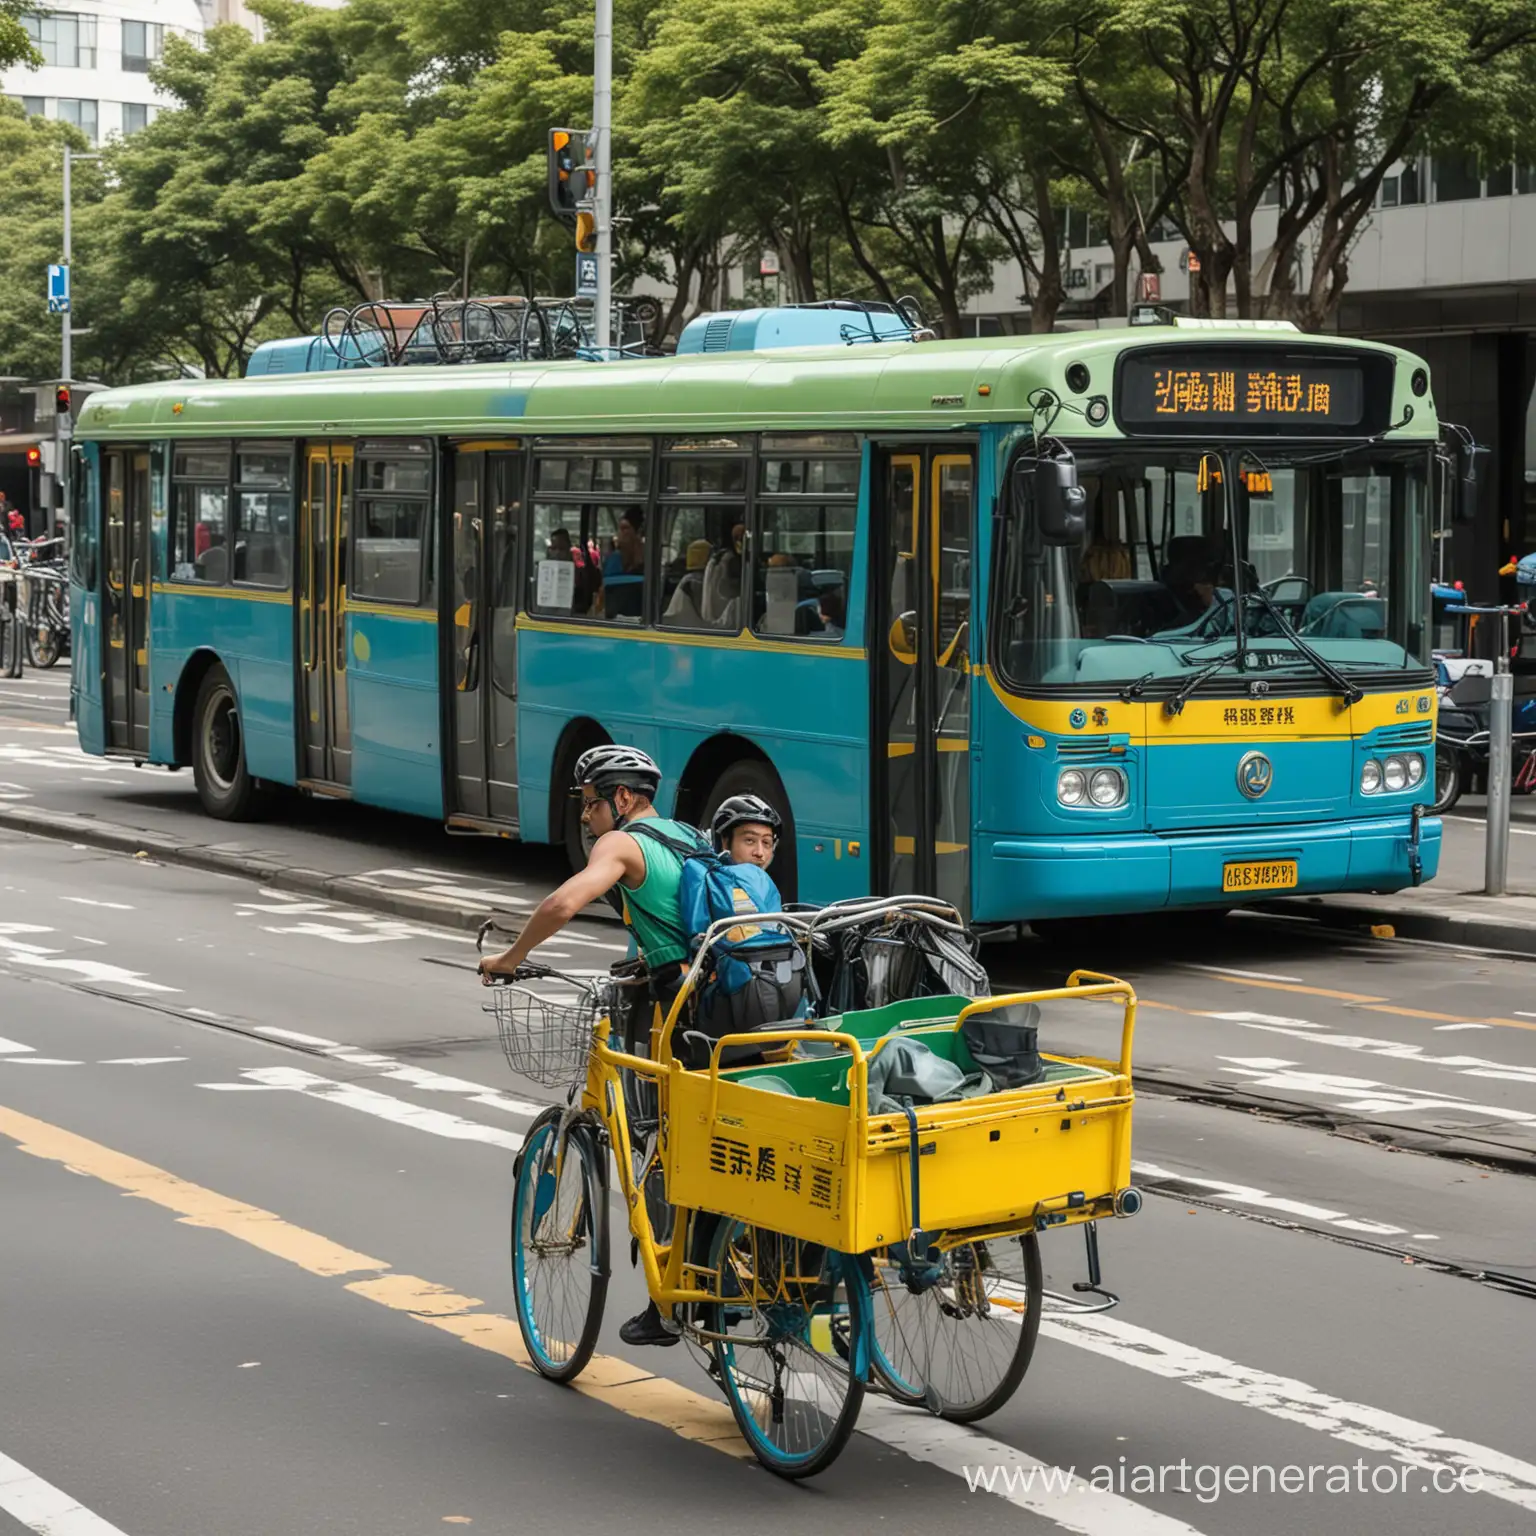 Urban-Transportation-Blue-and-Green-Bus-Yellow-Tram-and-Cyclist